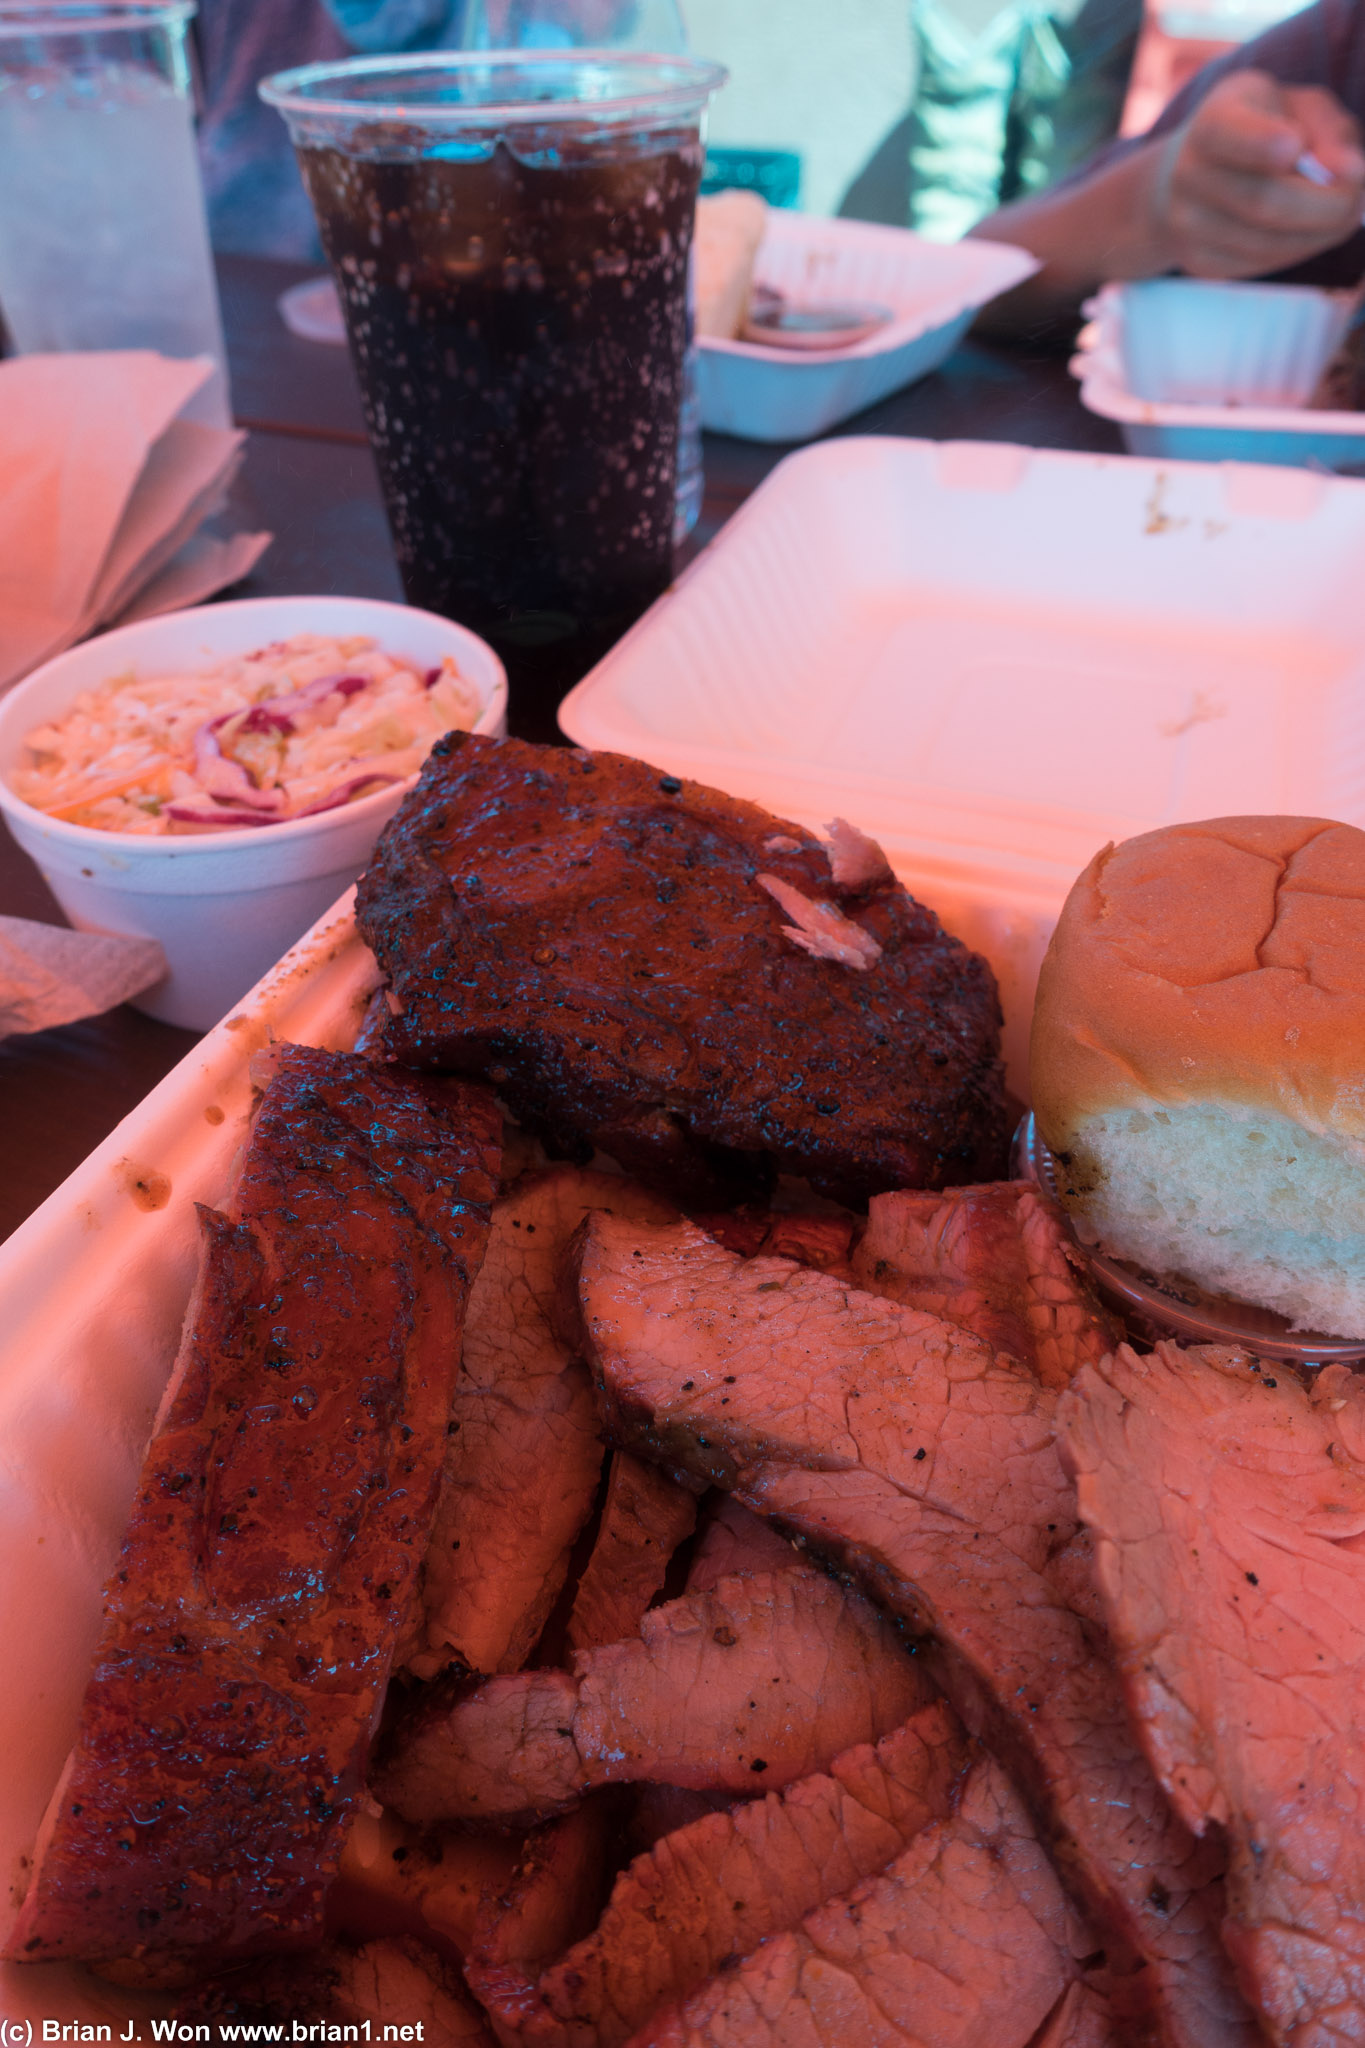 More tri-tip and ribs. NOMNOM!